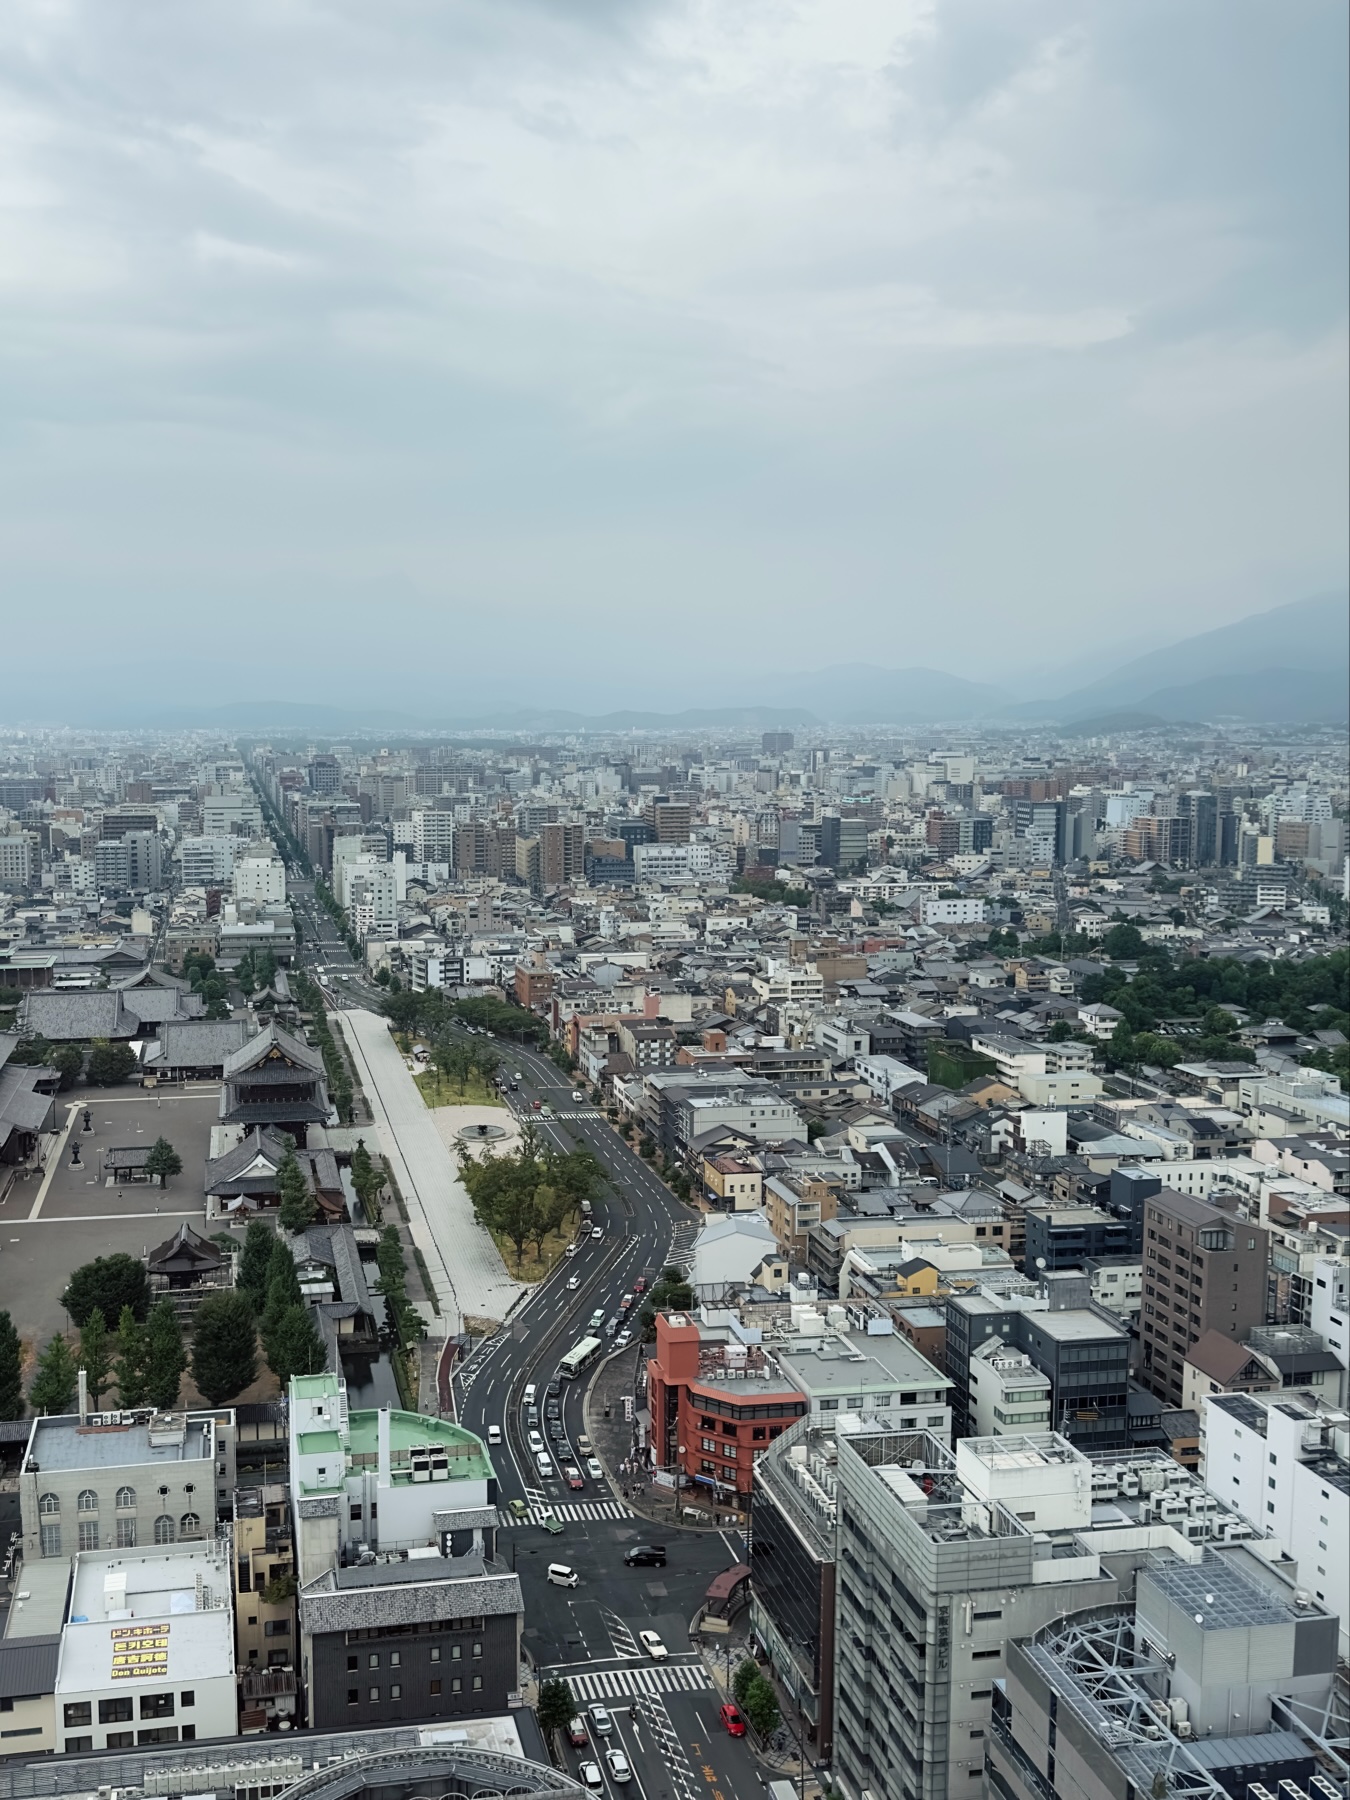 A view of a central highway next to a large temple viewed from Kyoto Tower